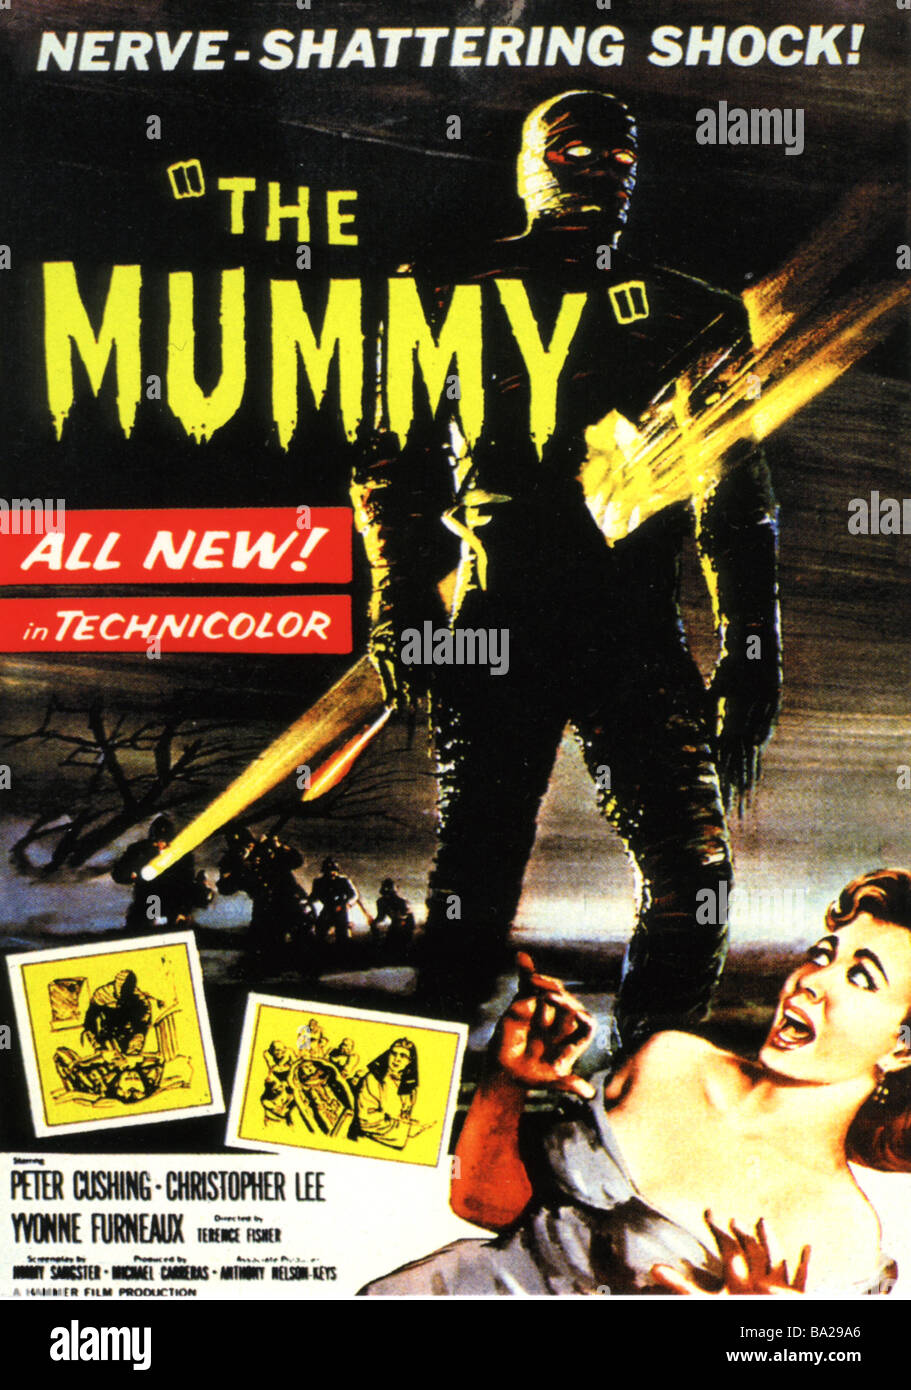 THE MUMMY Poster for 1959 Hammer film with Peter Cushing and Christopher Lee Stock Photo